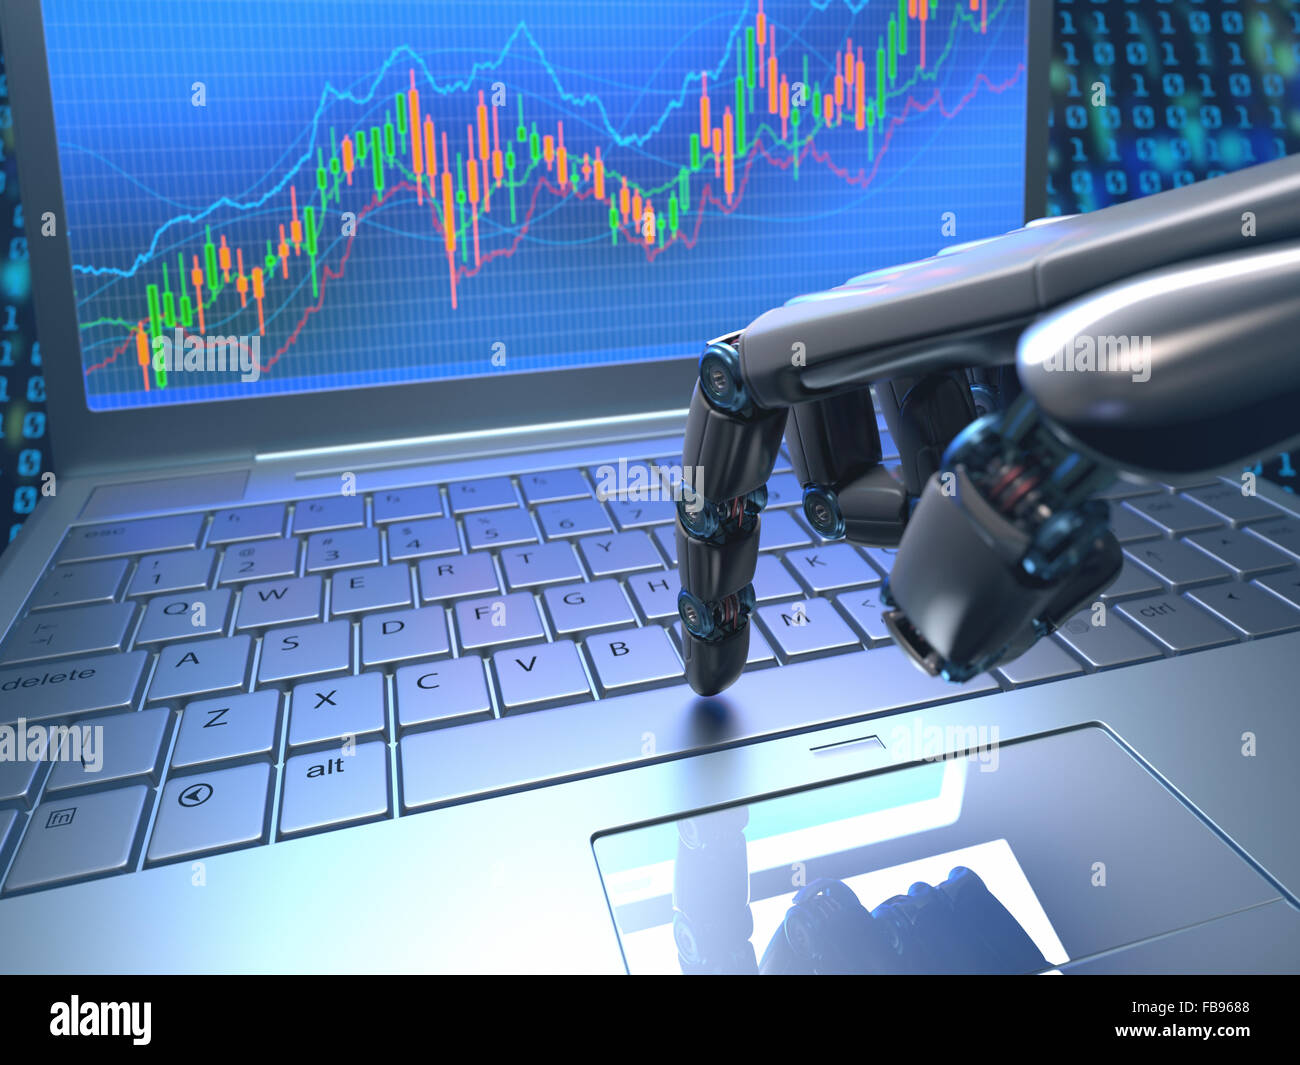 Image concept of a robot trading system that is a computer trading program that automatically submits trades. Stock Photo